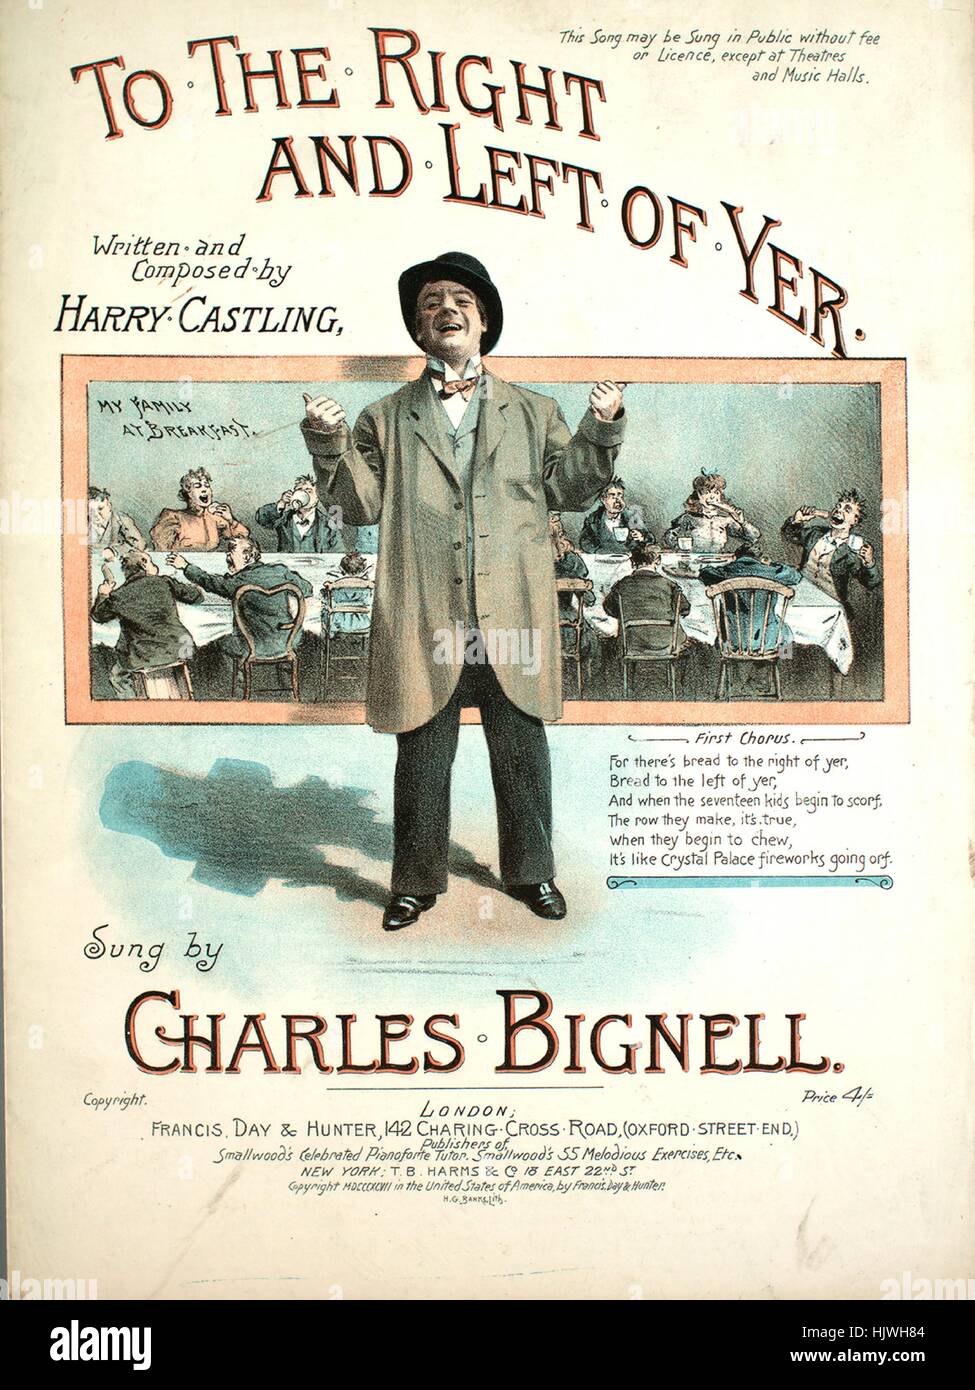 Sheet music cover image of the song 'To the Right and Left of Yer', with original authorship notes reading 'Written and Composed by Harry Castling', United Kingdom, 1897. The publisher is listed as 'Francis, Day and Hunter, 142 Charing Cross Road (Oxford Street End)', the form of composition is 'strophic with chorus', the instrumentation is 'piano and voice', the first line reads 'When a man has been married for seventeen years, And his wages are one pound one', and the illustration artist is listed as 'H.G. Banks, Lith.; Henderson and Spalding Printers, London W.'. Stock Photo